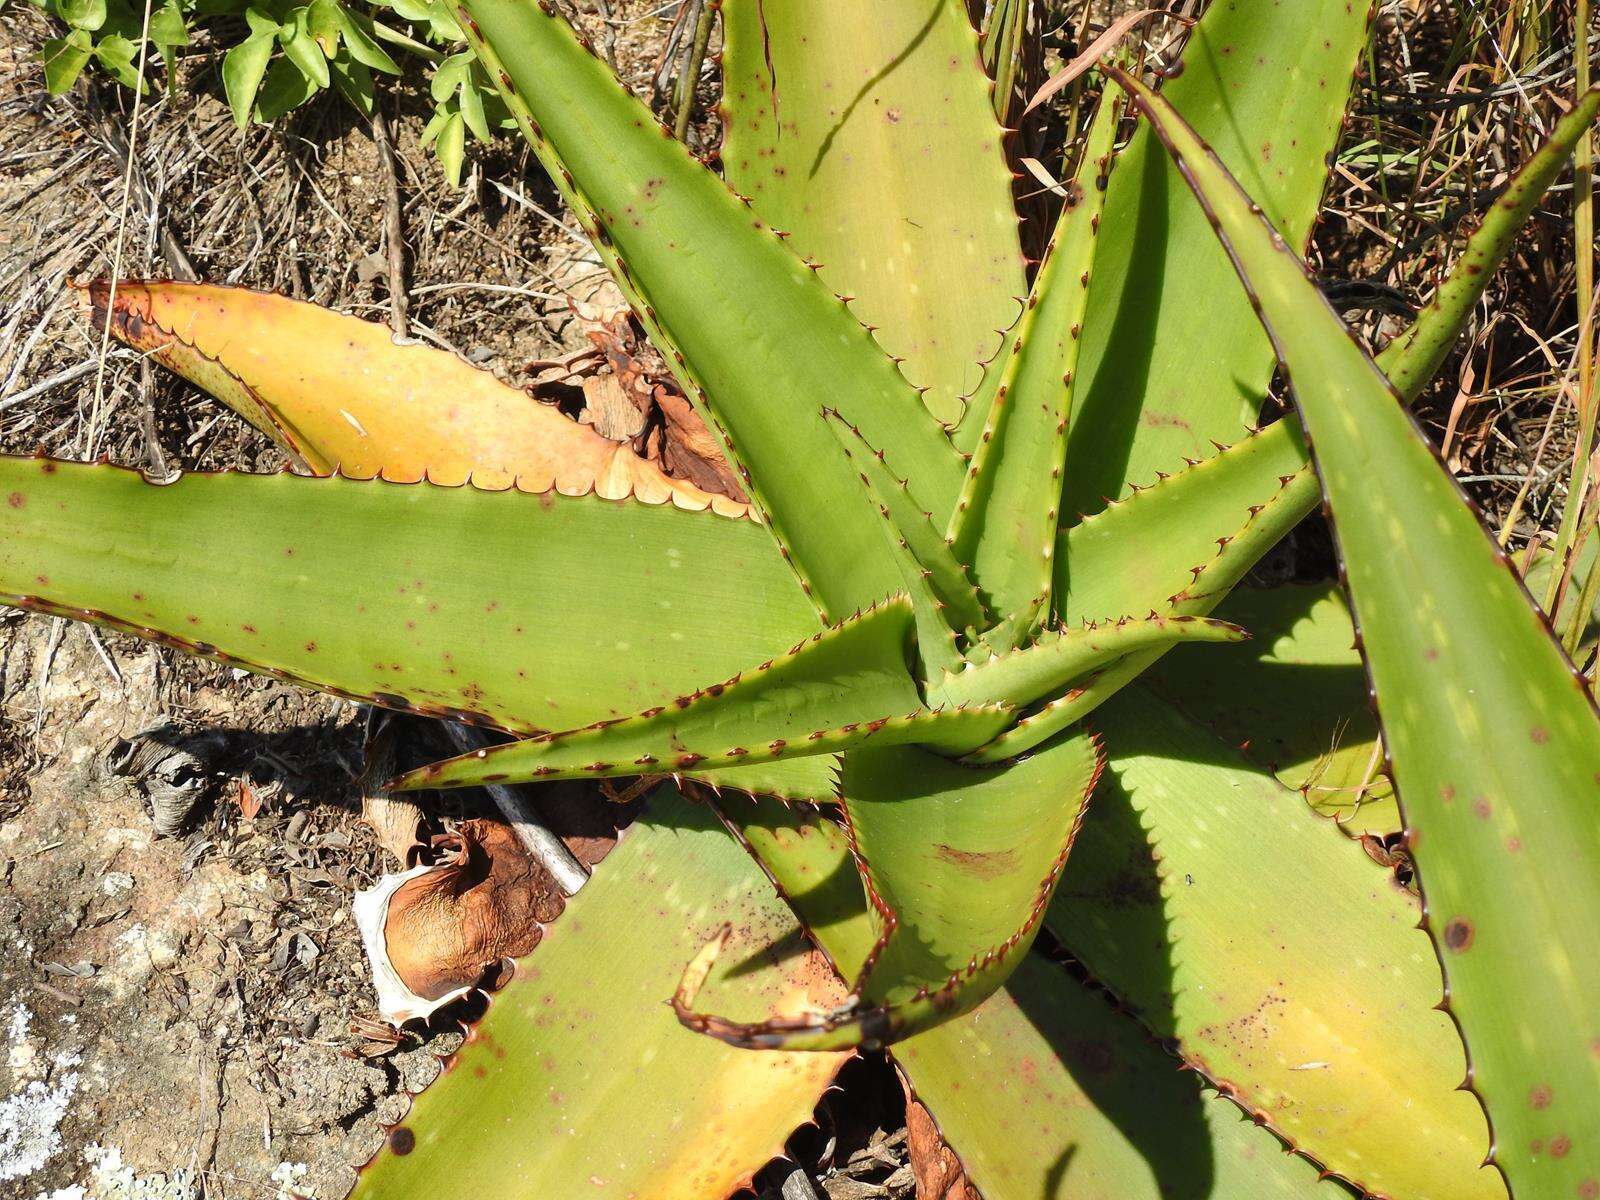 Image of Aloe affinis A. Berger